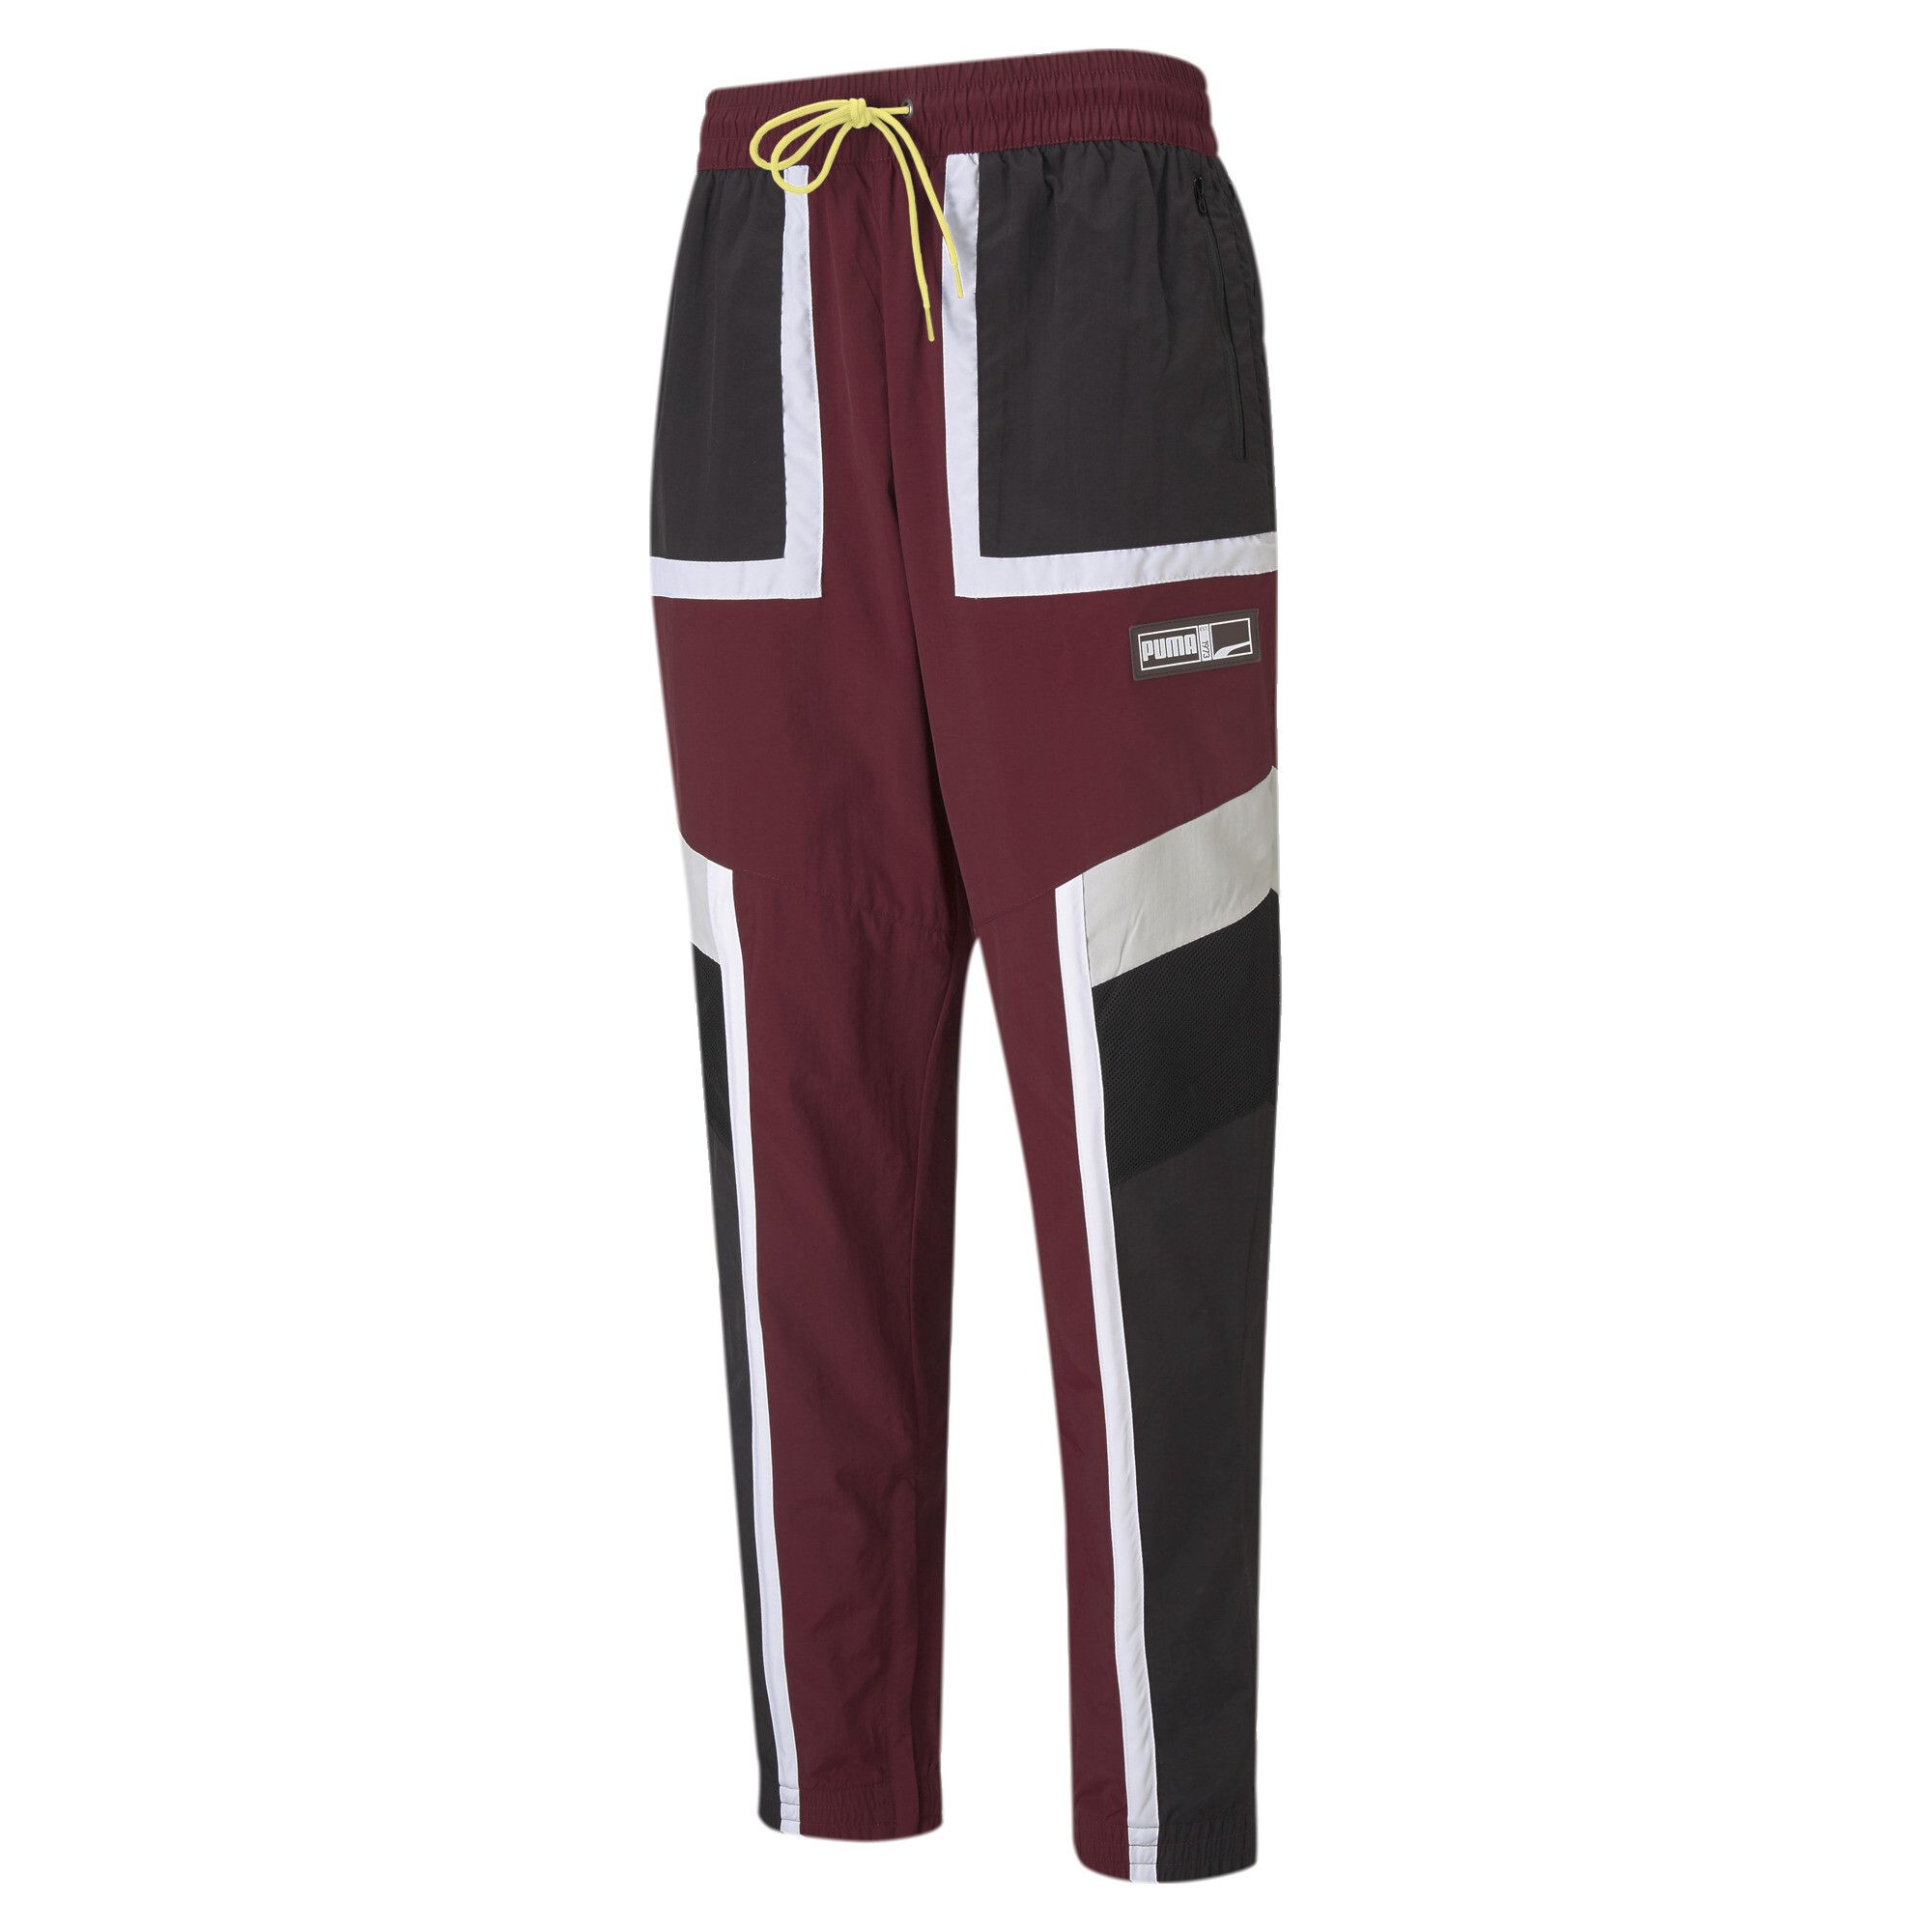 PRODUCT STORY Retro-inspired and street sleek, the Court Side Basketball Pants are head-turners. With lounge-worthy lines and in standout colour combinations, you'll make comfortable look cool. DETAILS : Regular fit Side pockets, plus hidden pockets for secure storage of belongings Elasticated cuffs Adjustable waistband with elongated drawcords for customised comfort PUMA branding at left thigh